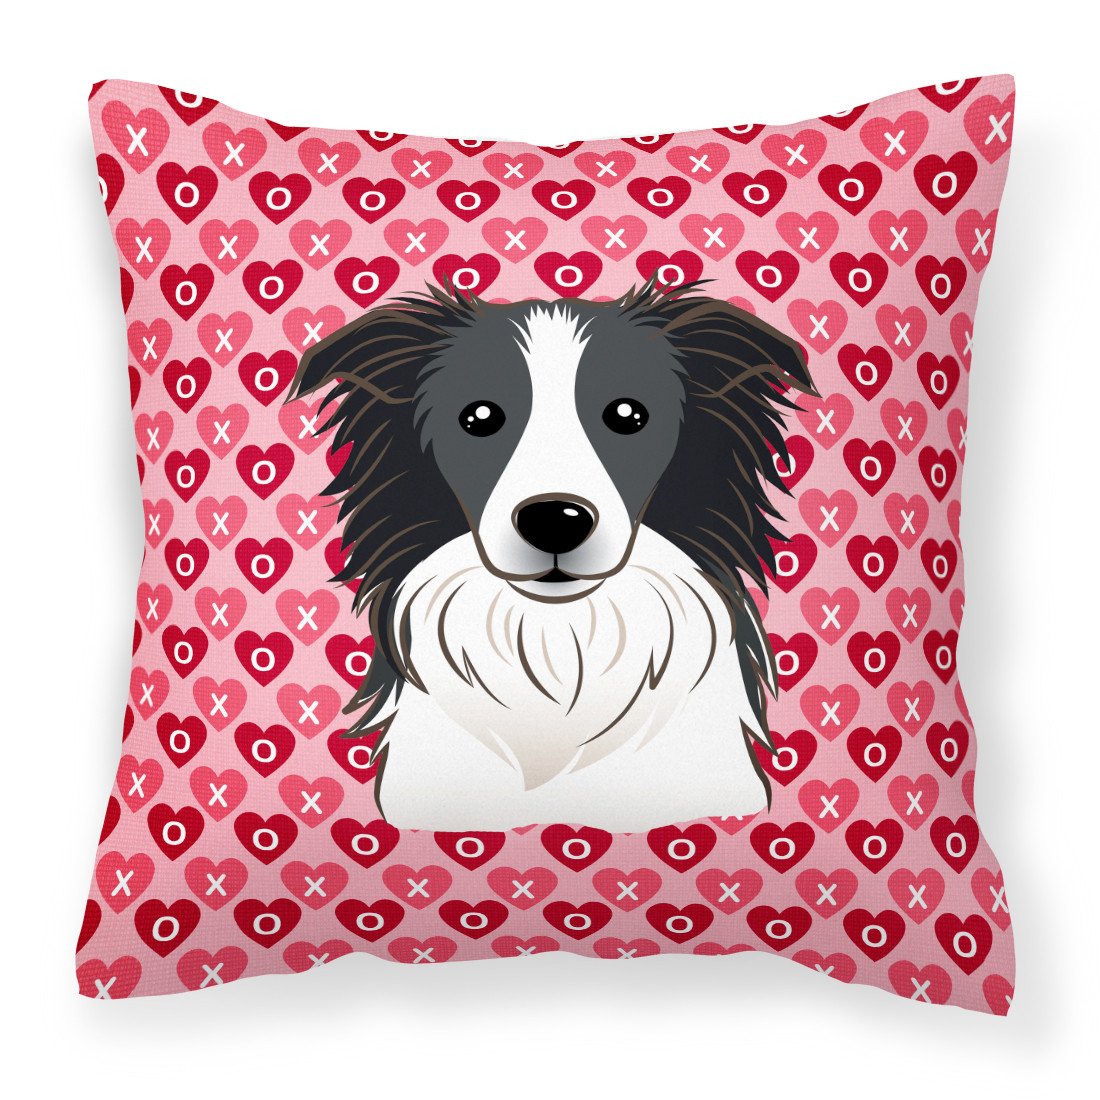 Border Collie Hearts Fabric Decorative Pillow BB5311PW1818 by Caroline's Treasures